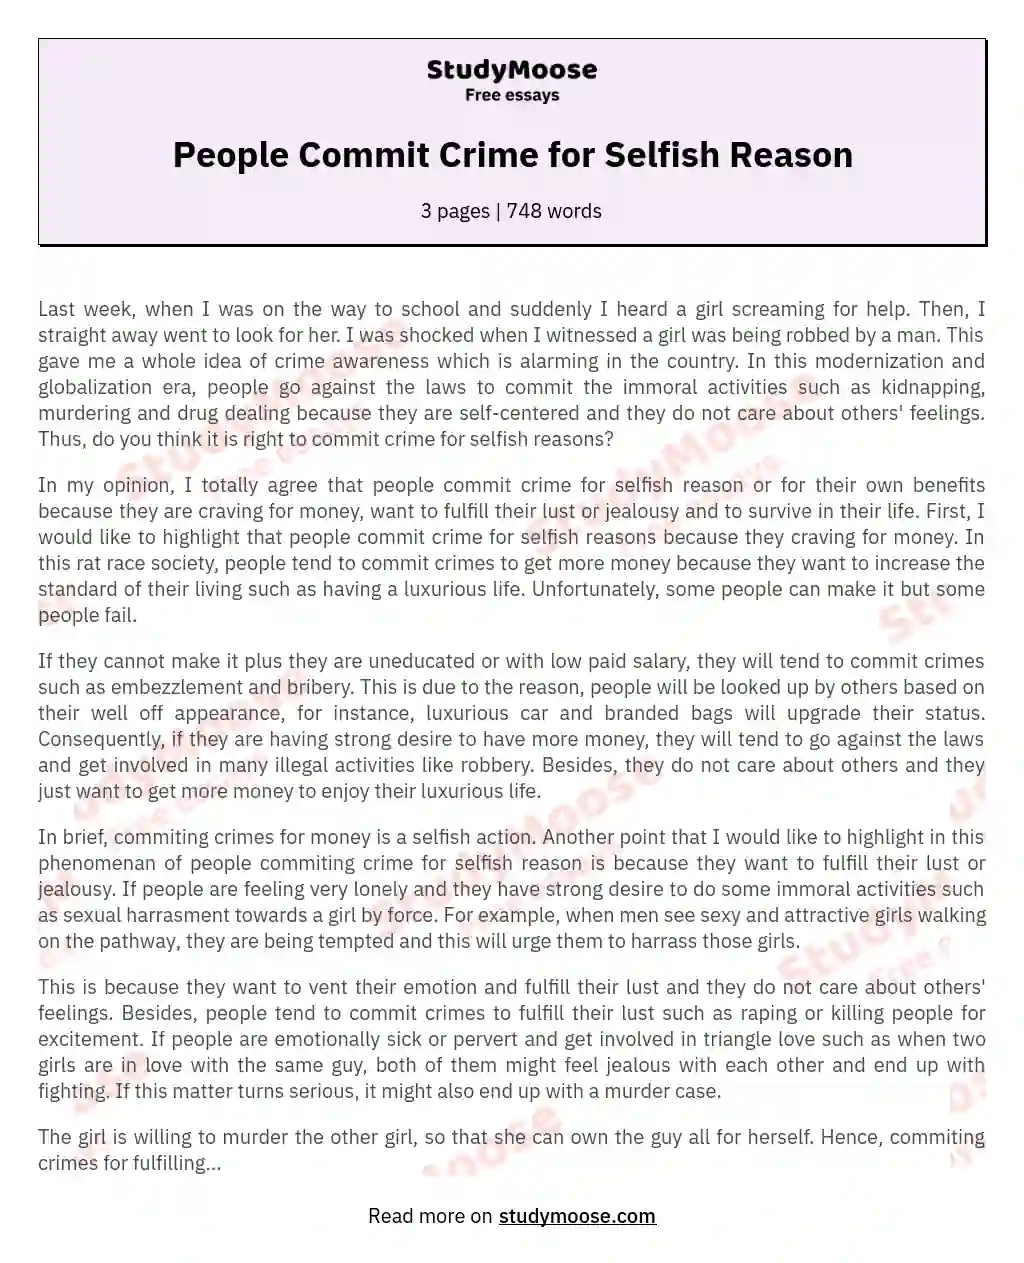 People Commit Crime for Selfish Reason essay